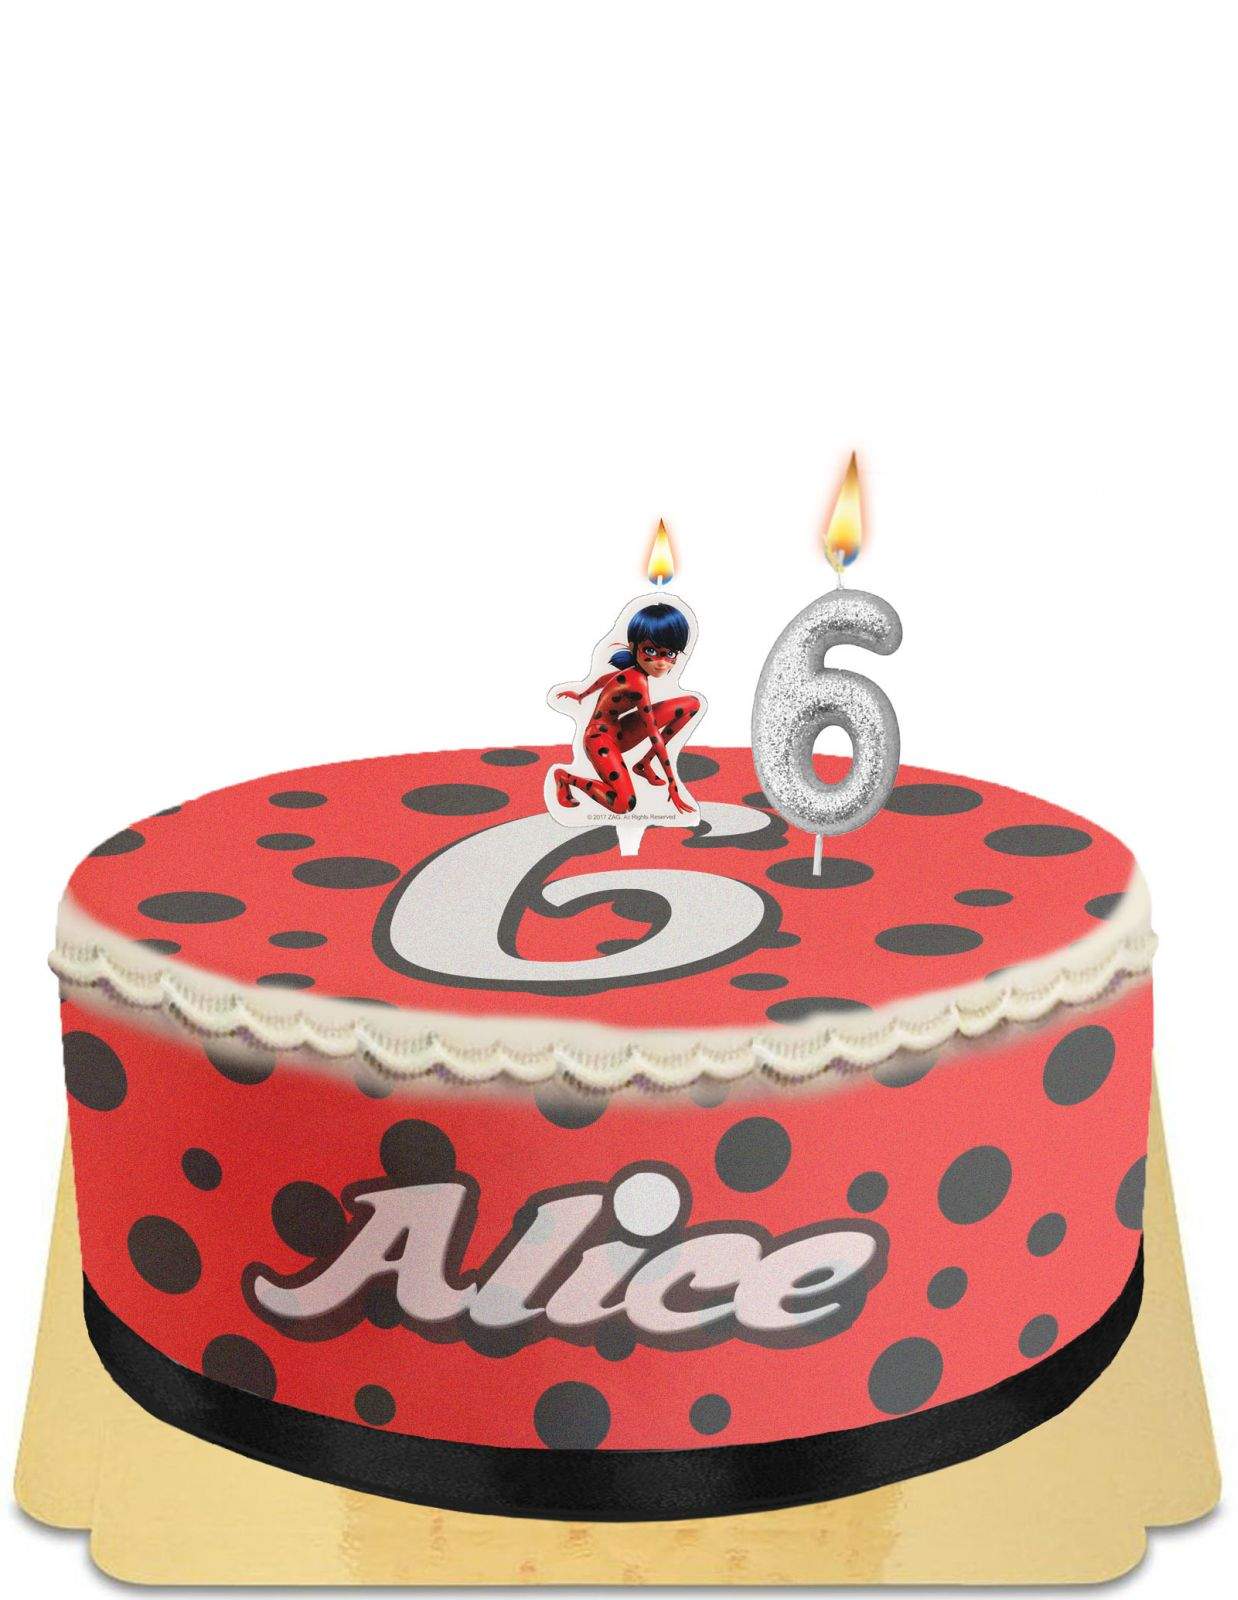 Miraculous Ladybug cake | Simply Sweet Creations | Flickr